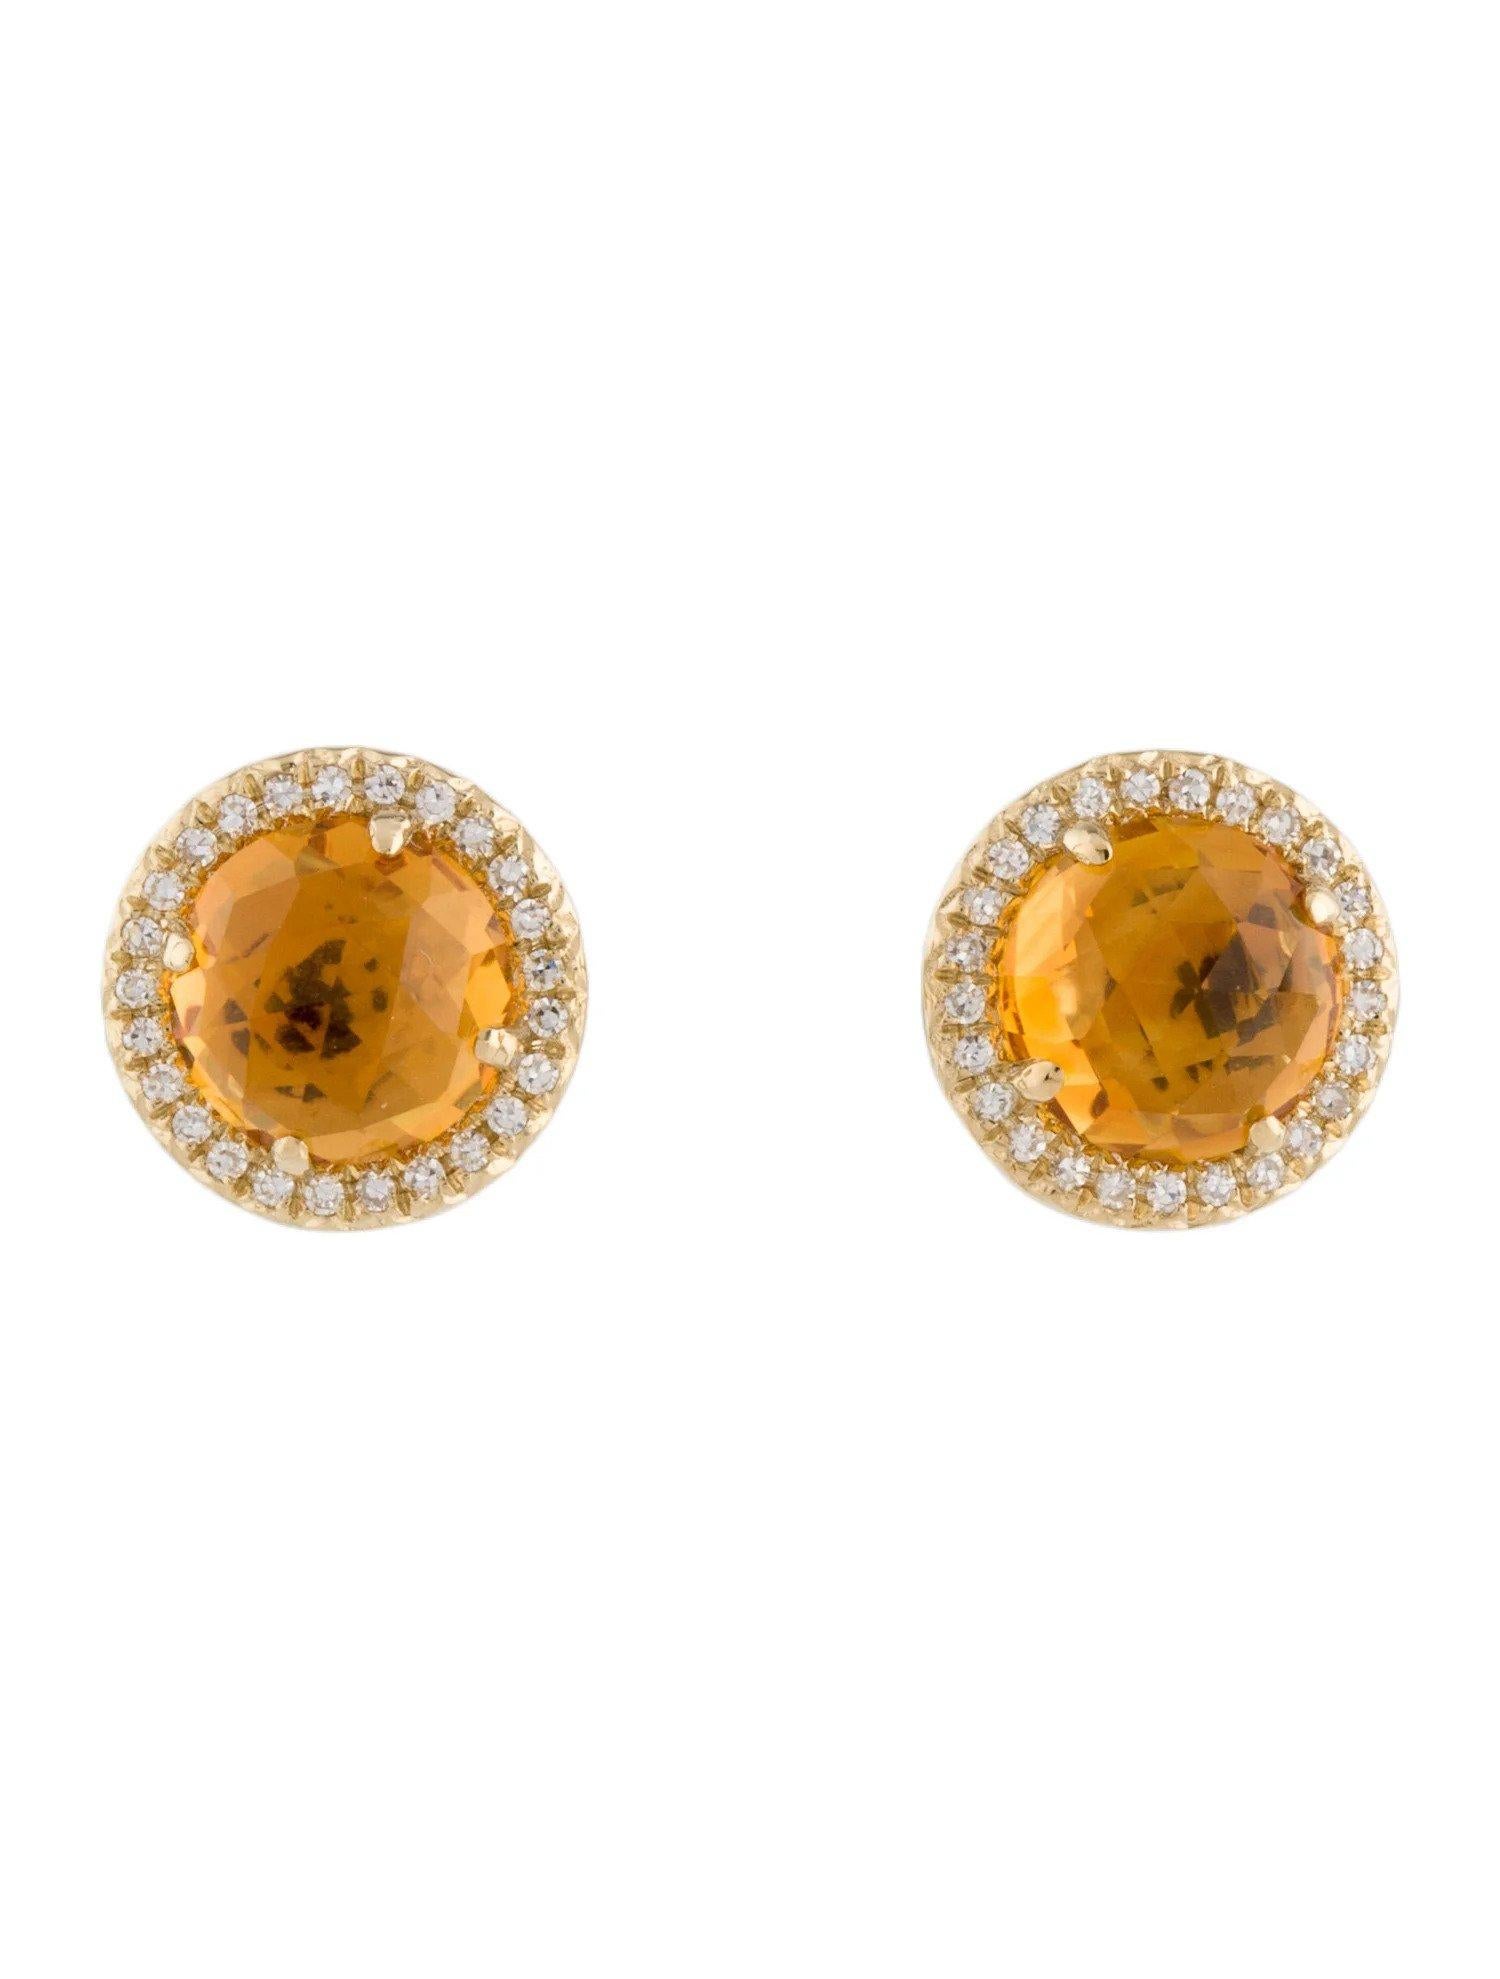 These Citrine & Diamond Earrings are a stunning and timeless accessory that can add a touch of glamour and sophistication to any outfit. 

These earrings each feature a 0.90 Carat Round Citrine, with a Diamond Halo comprised of 0.06 Carats of Single